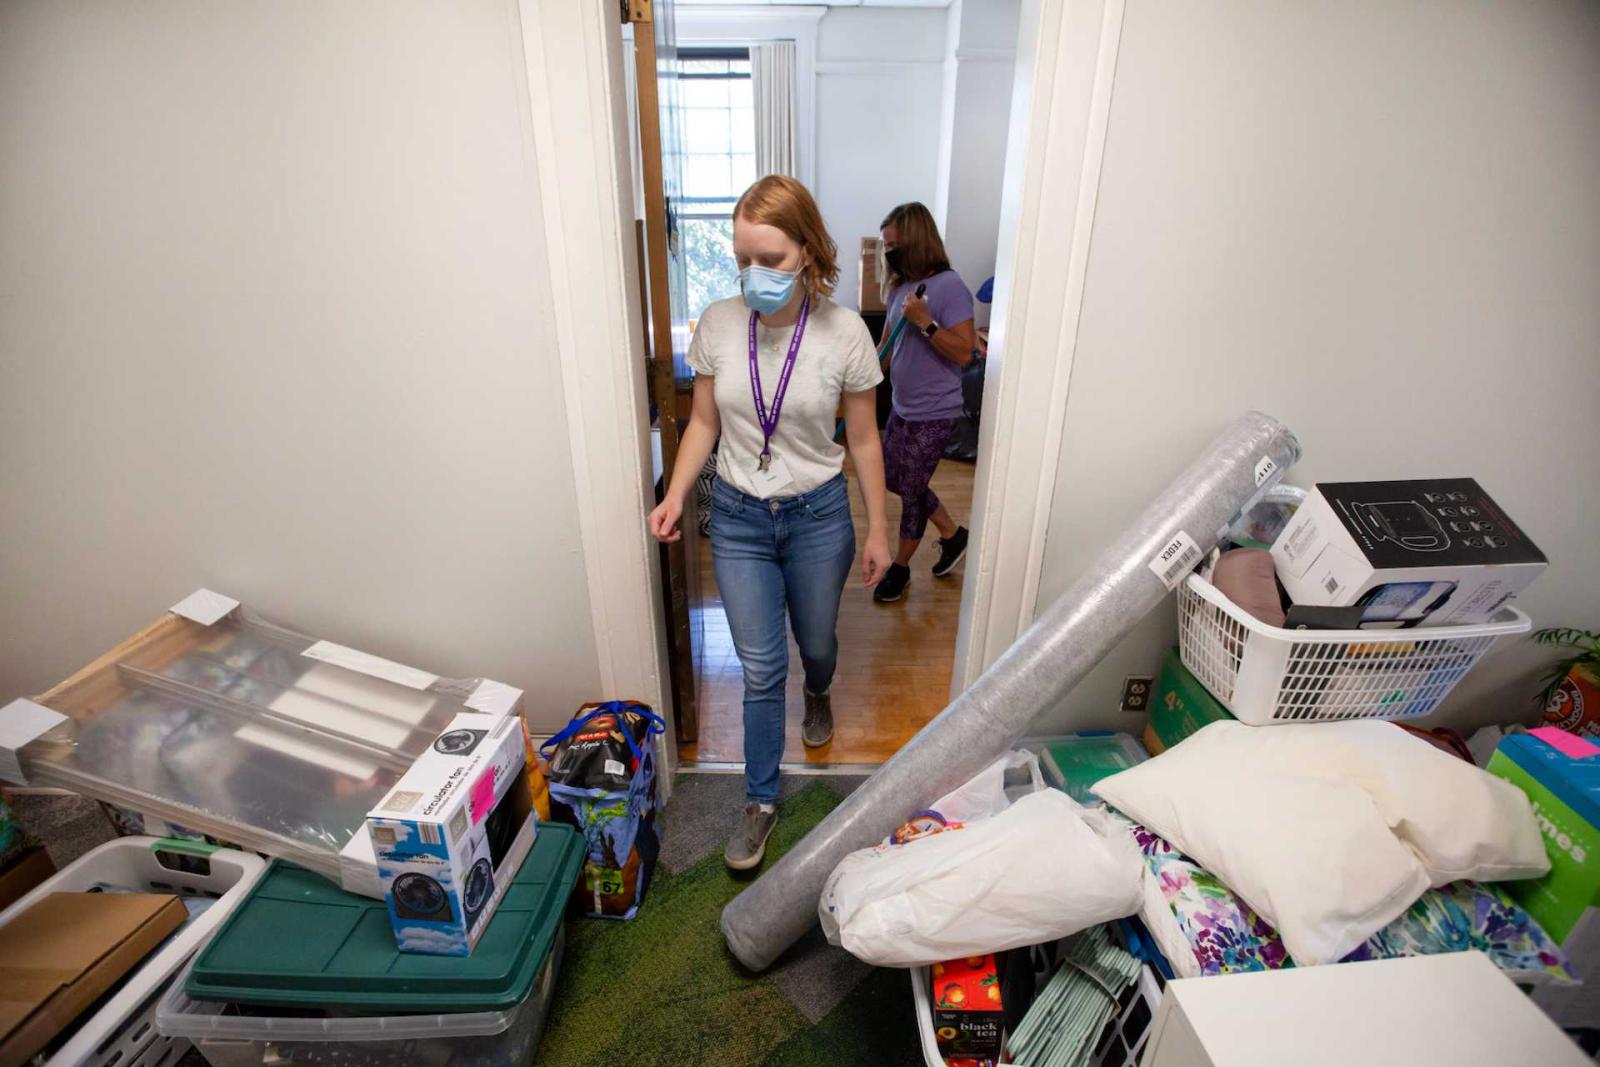 Student walks into dorm room filled with unpacked furniture and luggage.